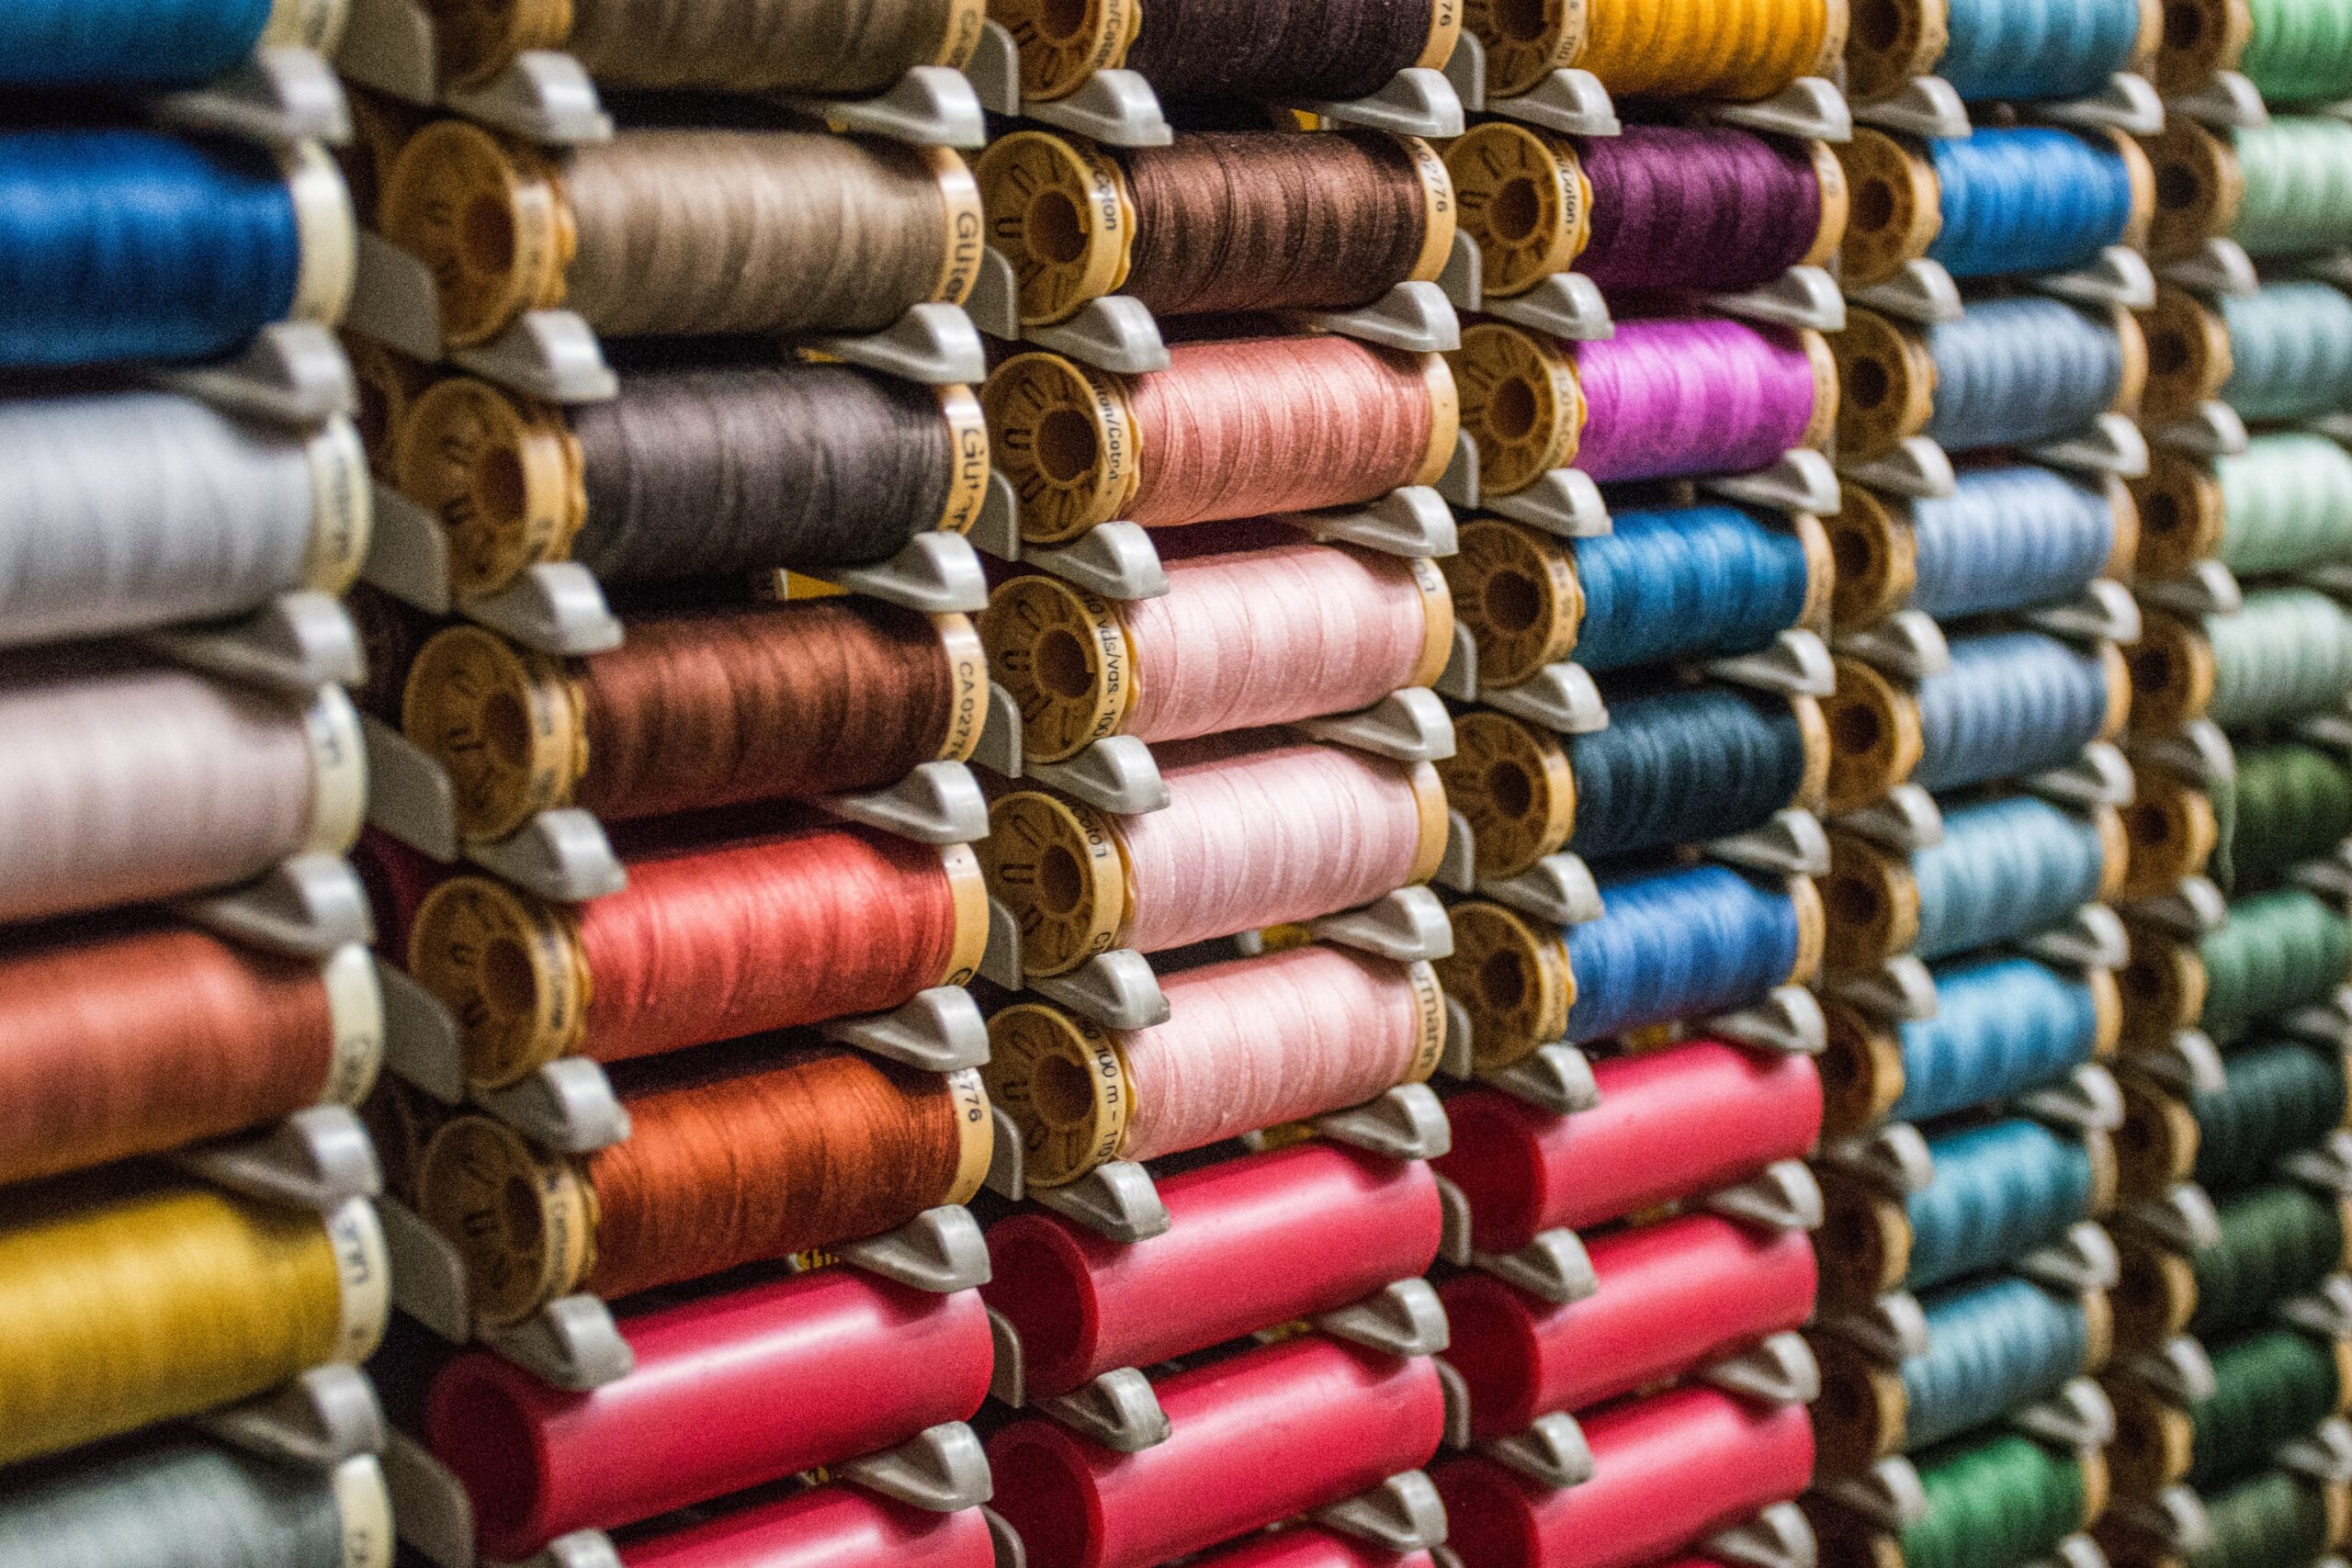 Thread Rolls in a Variety of Colors